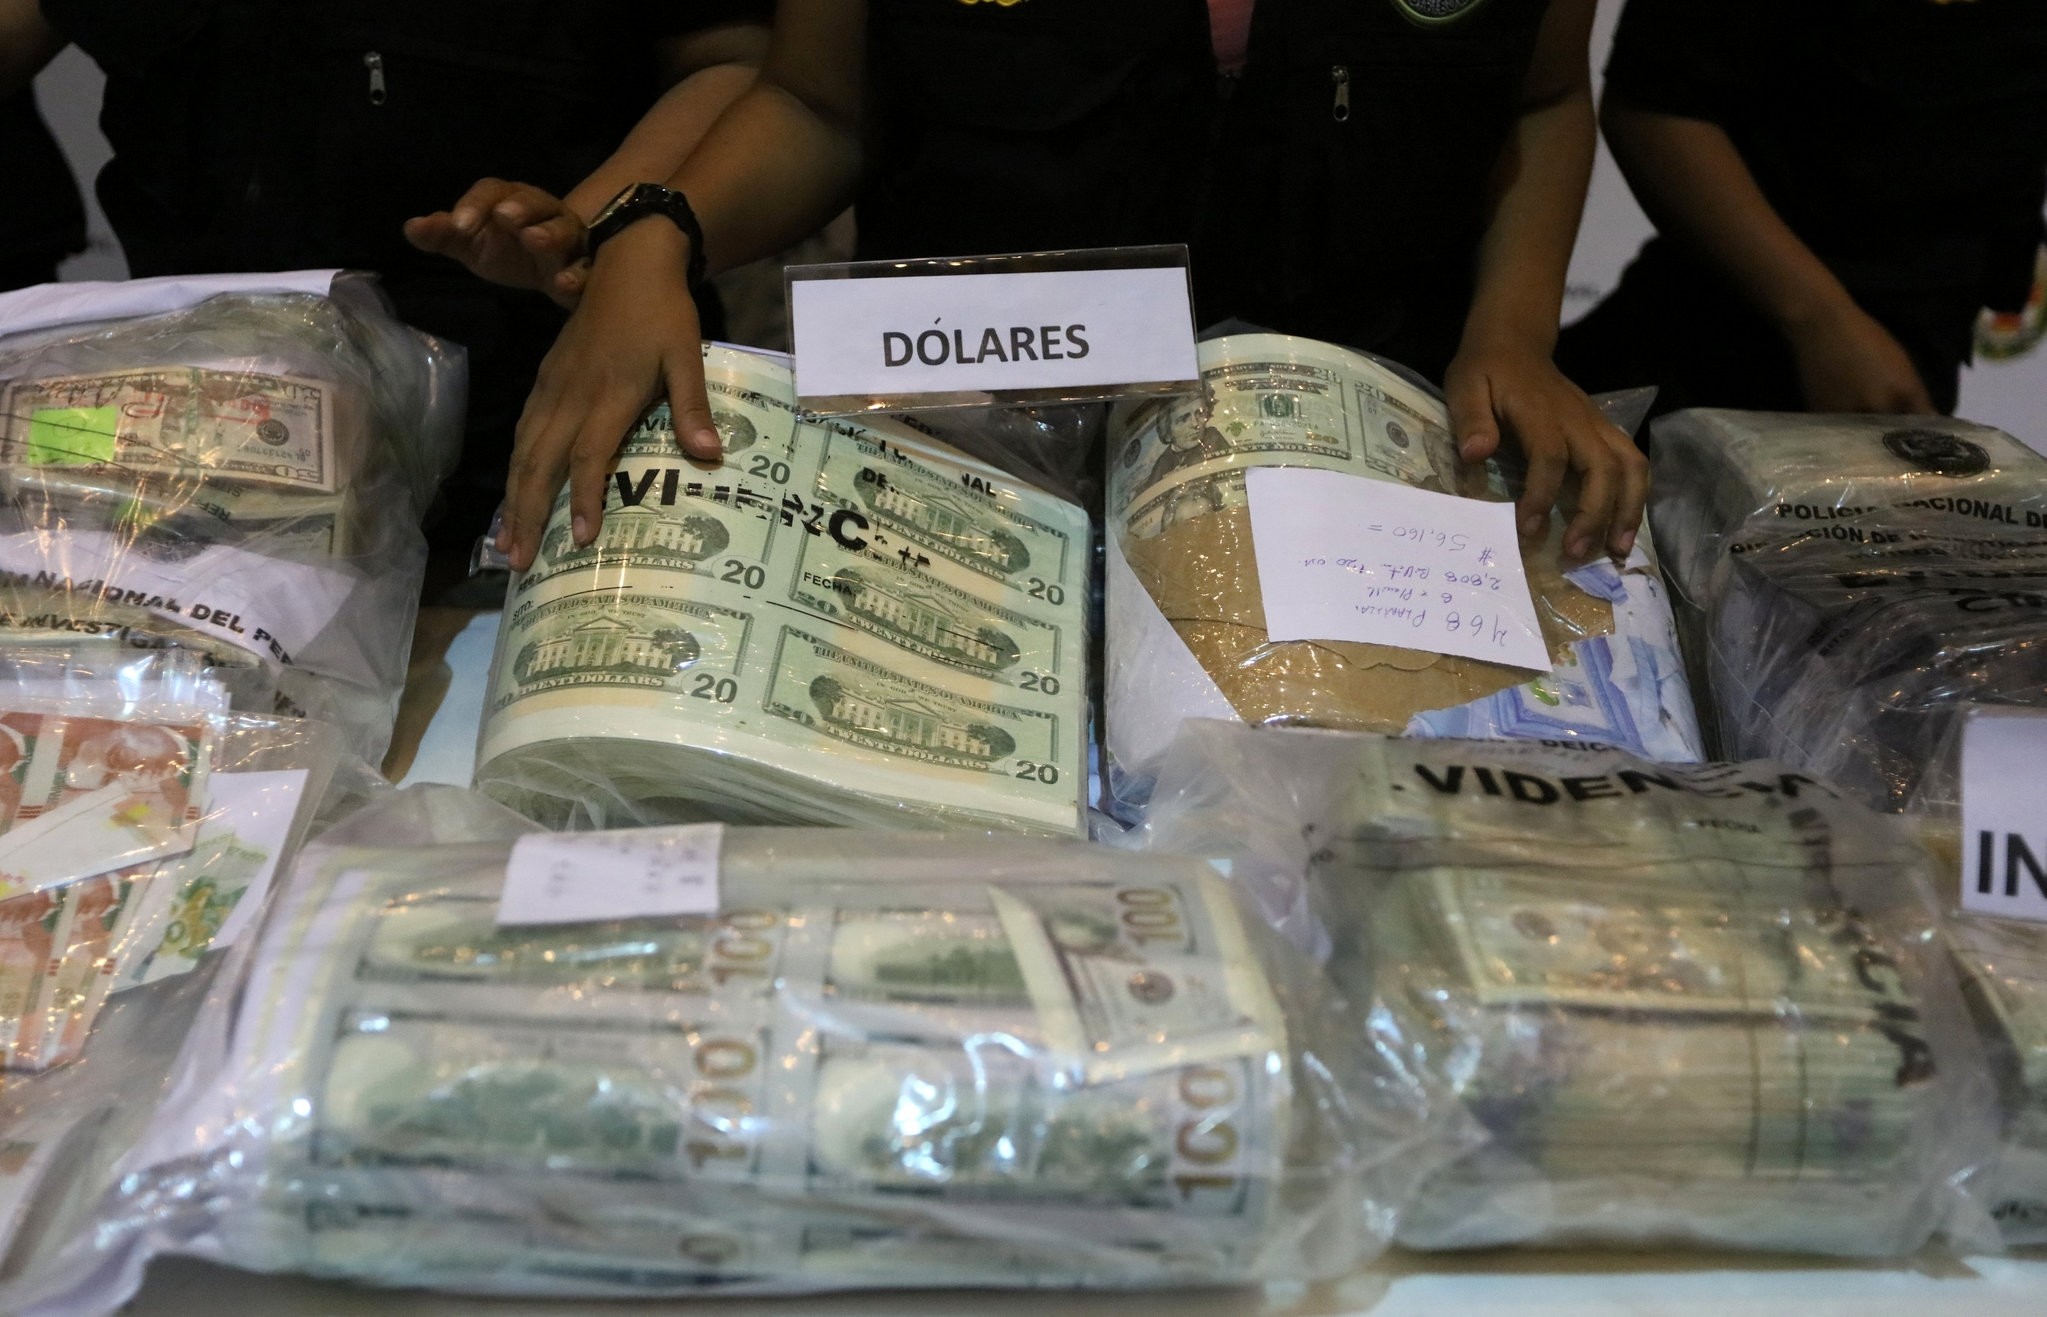 Police officers display seized counterfeit U.S. and Nuevos Soles bills at a news conference in Lima, Peru, November 16, 2016. (Reuters Photo)